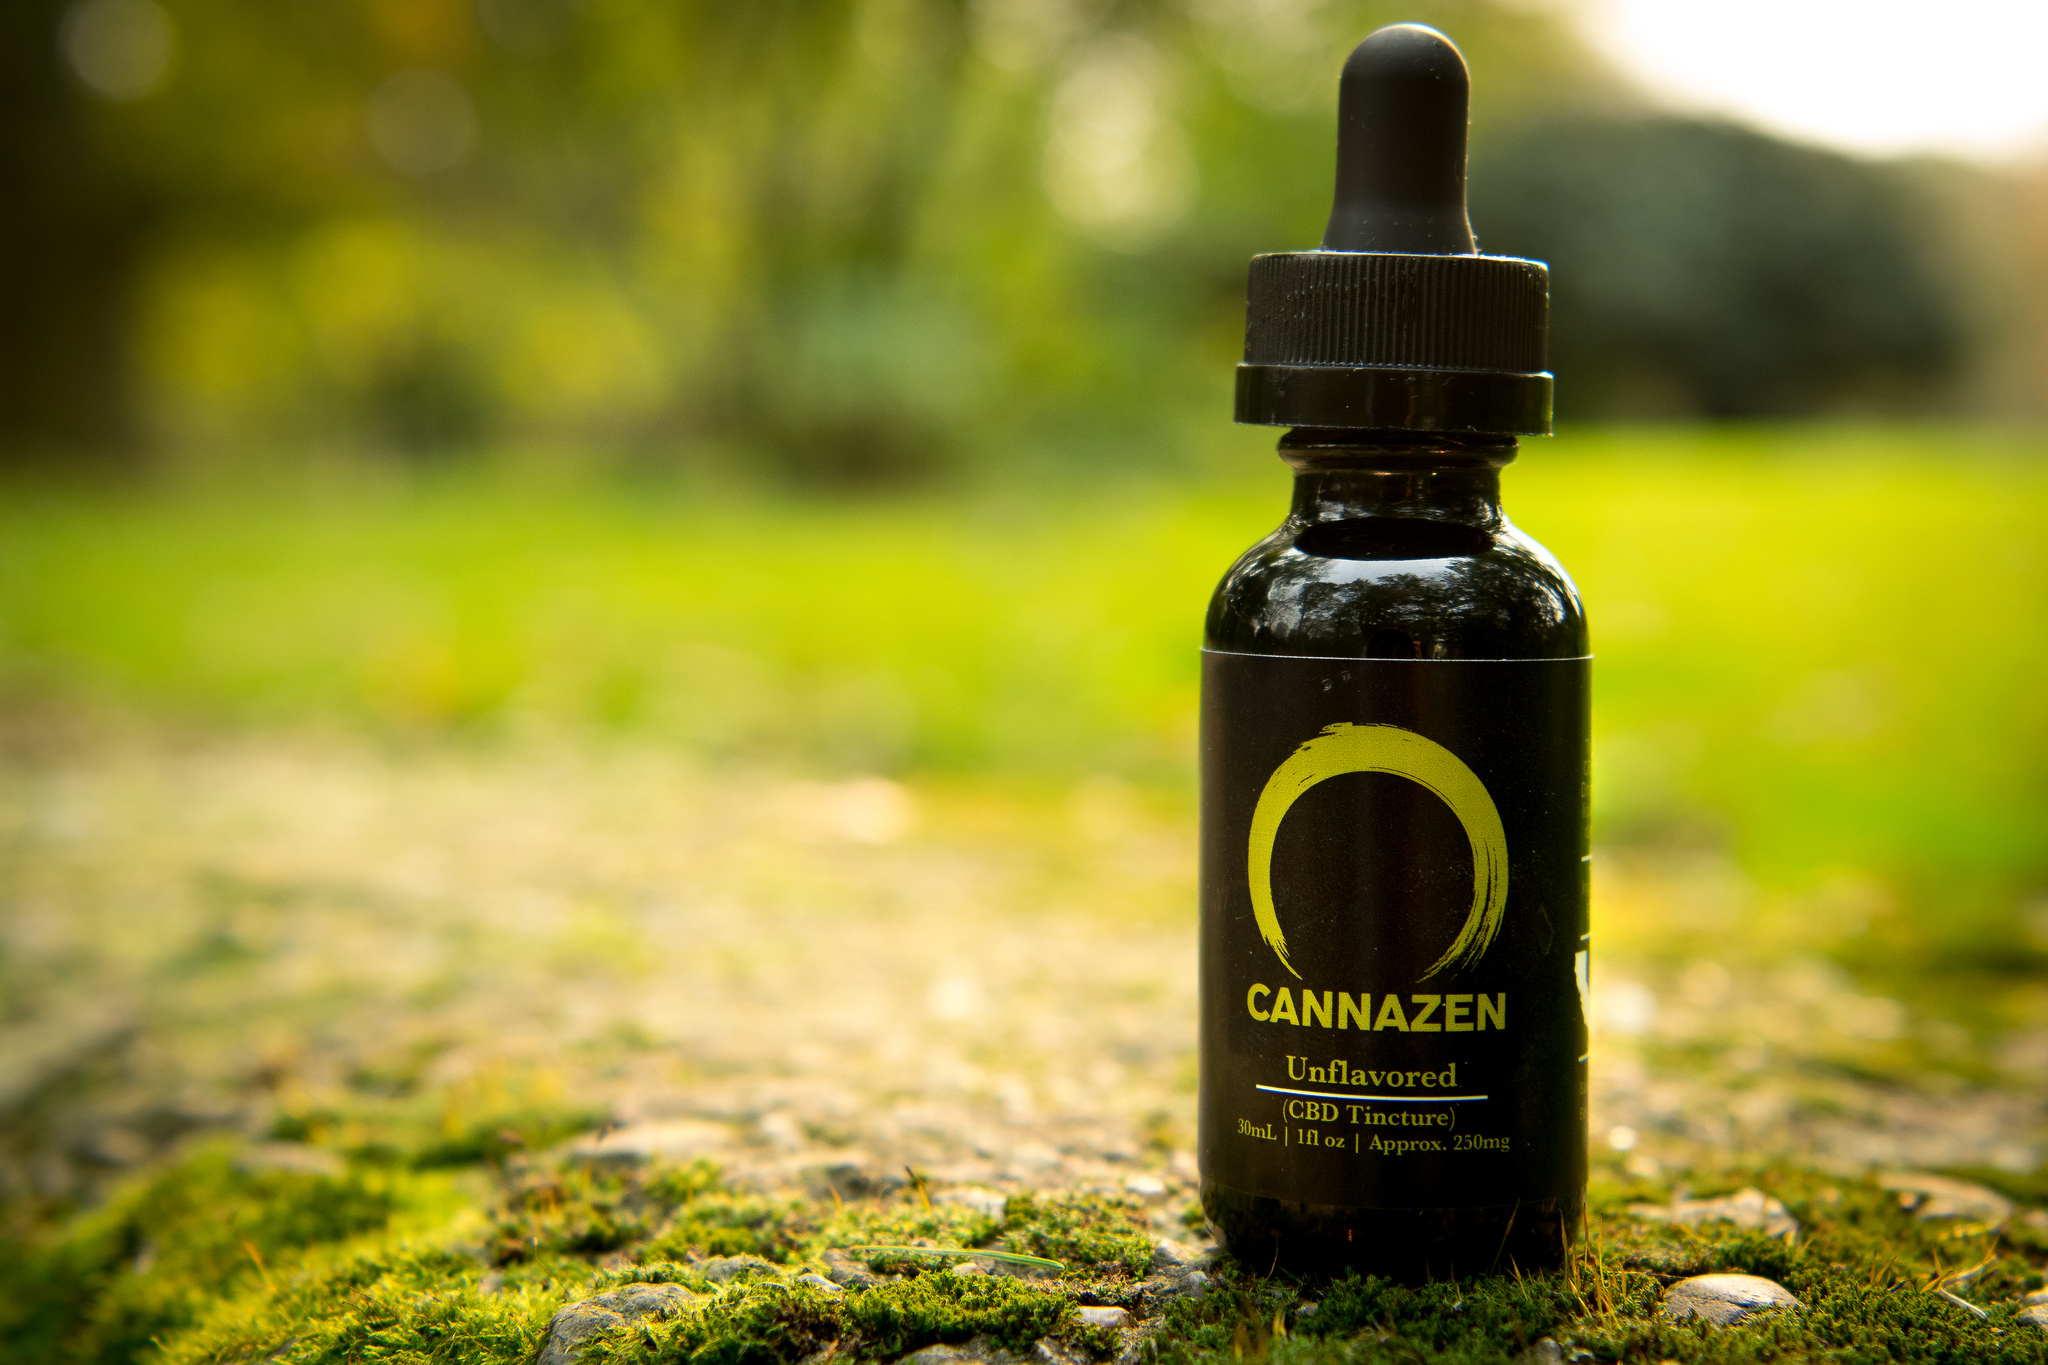 Here’s the list of the strongest CBD oils to buy in 2021